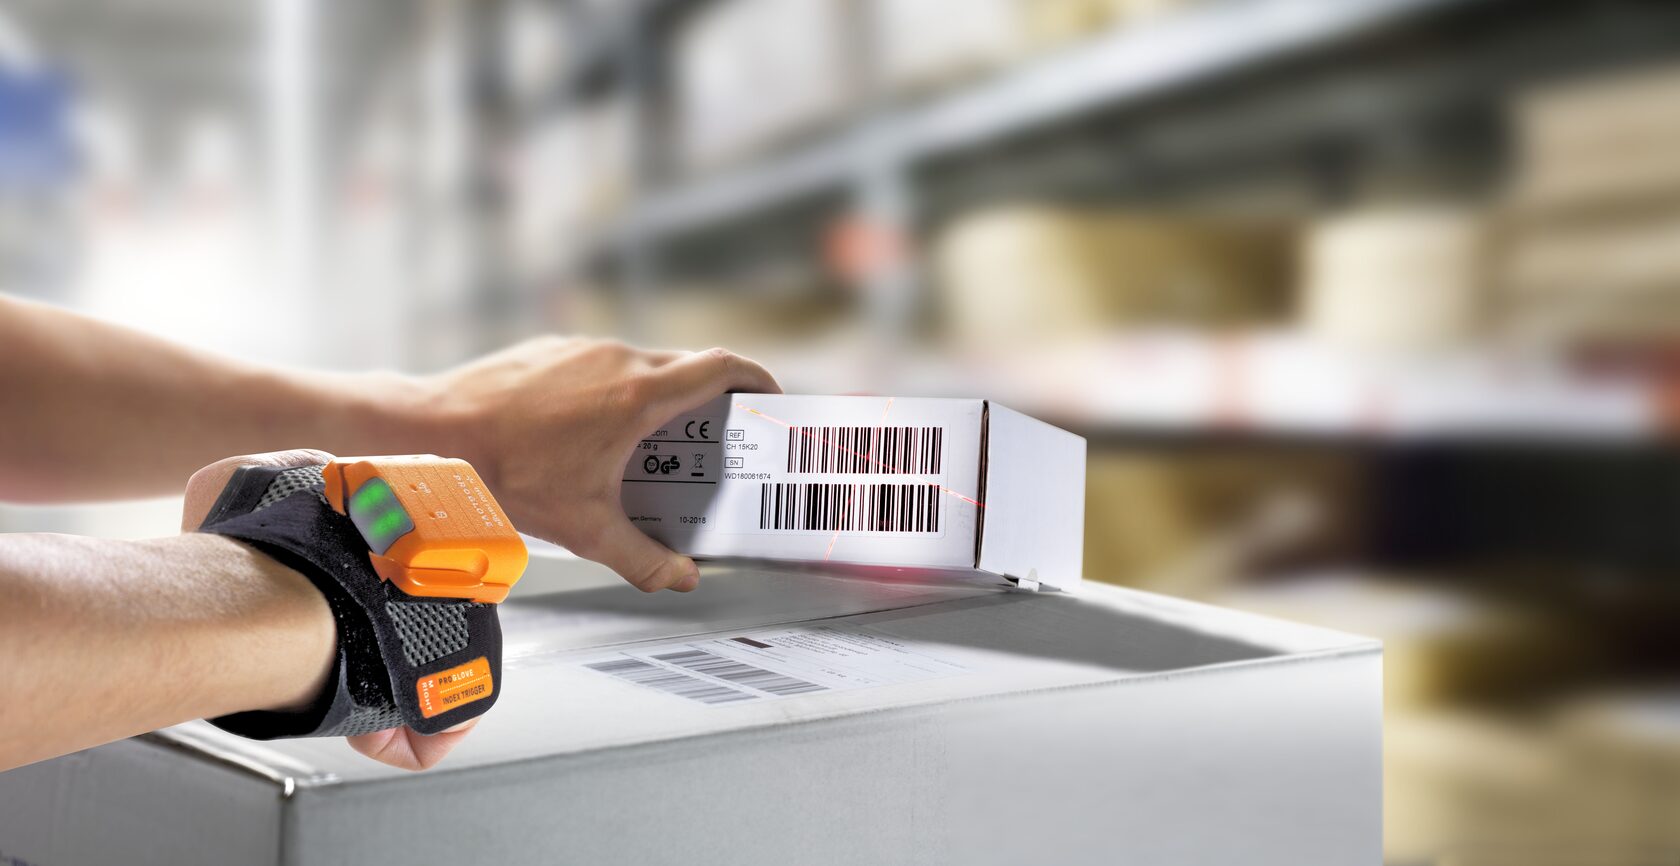 a hand with a ProGlove index trigger wrap and Mark 2 scanner, scanning a barcode on a box